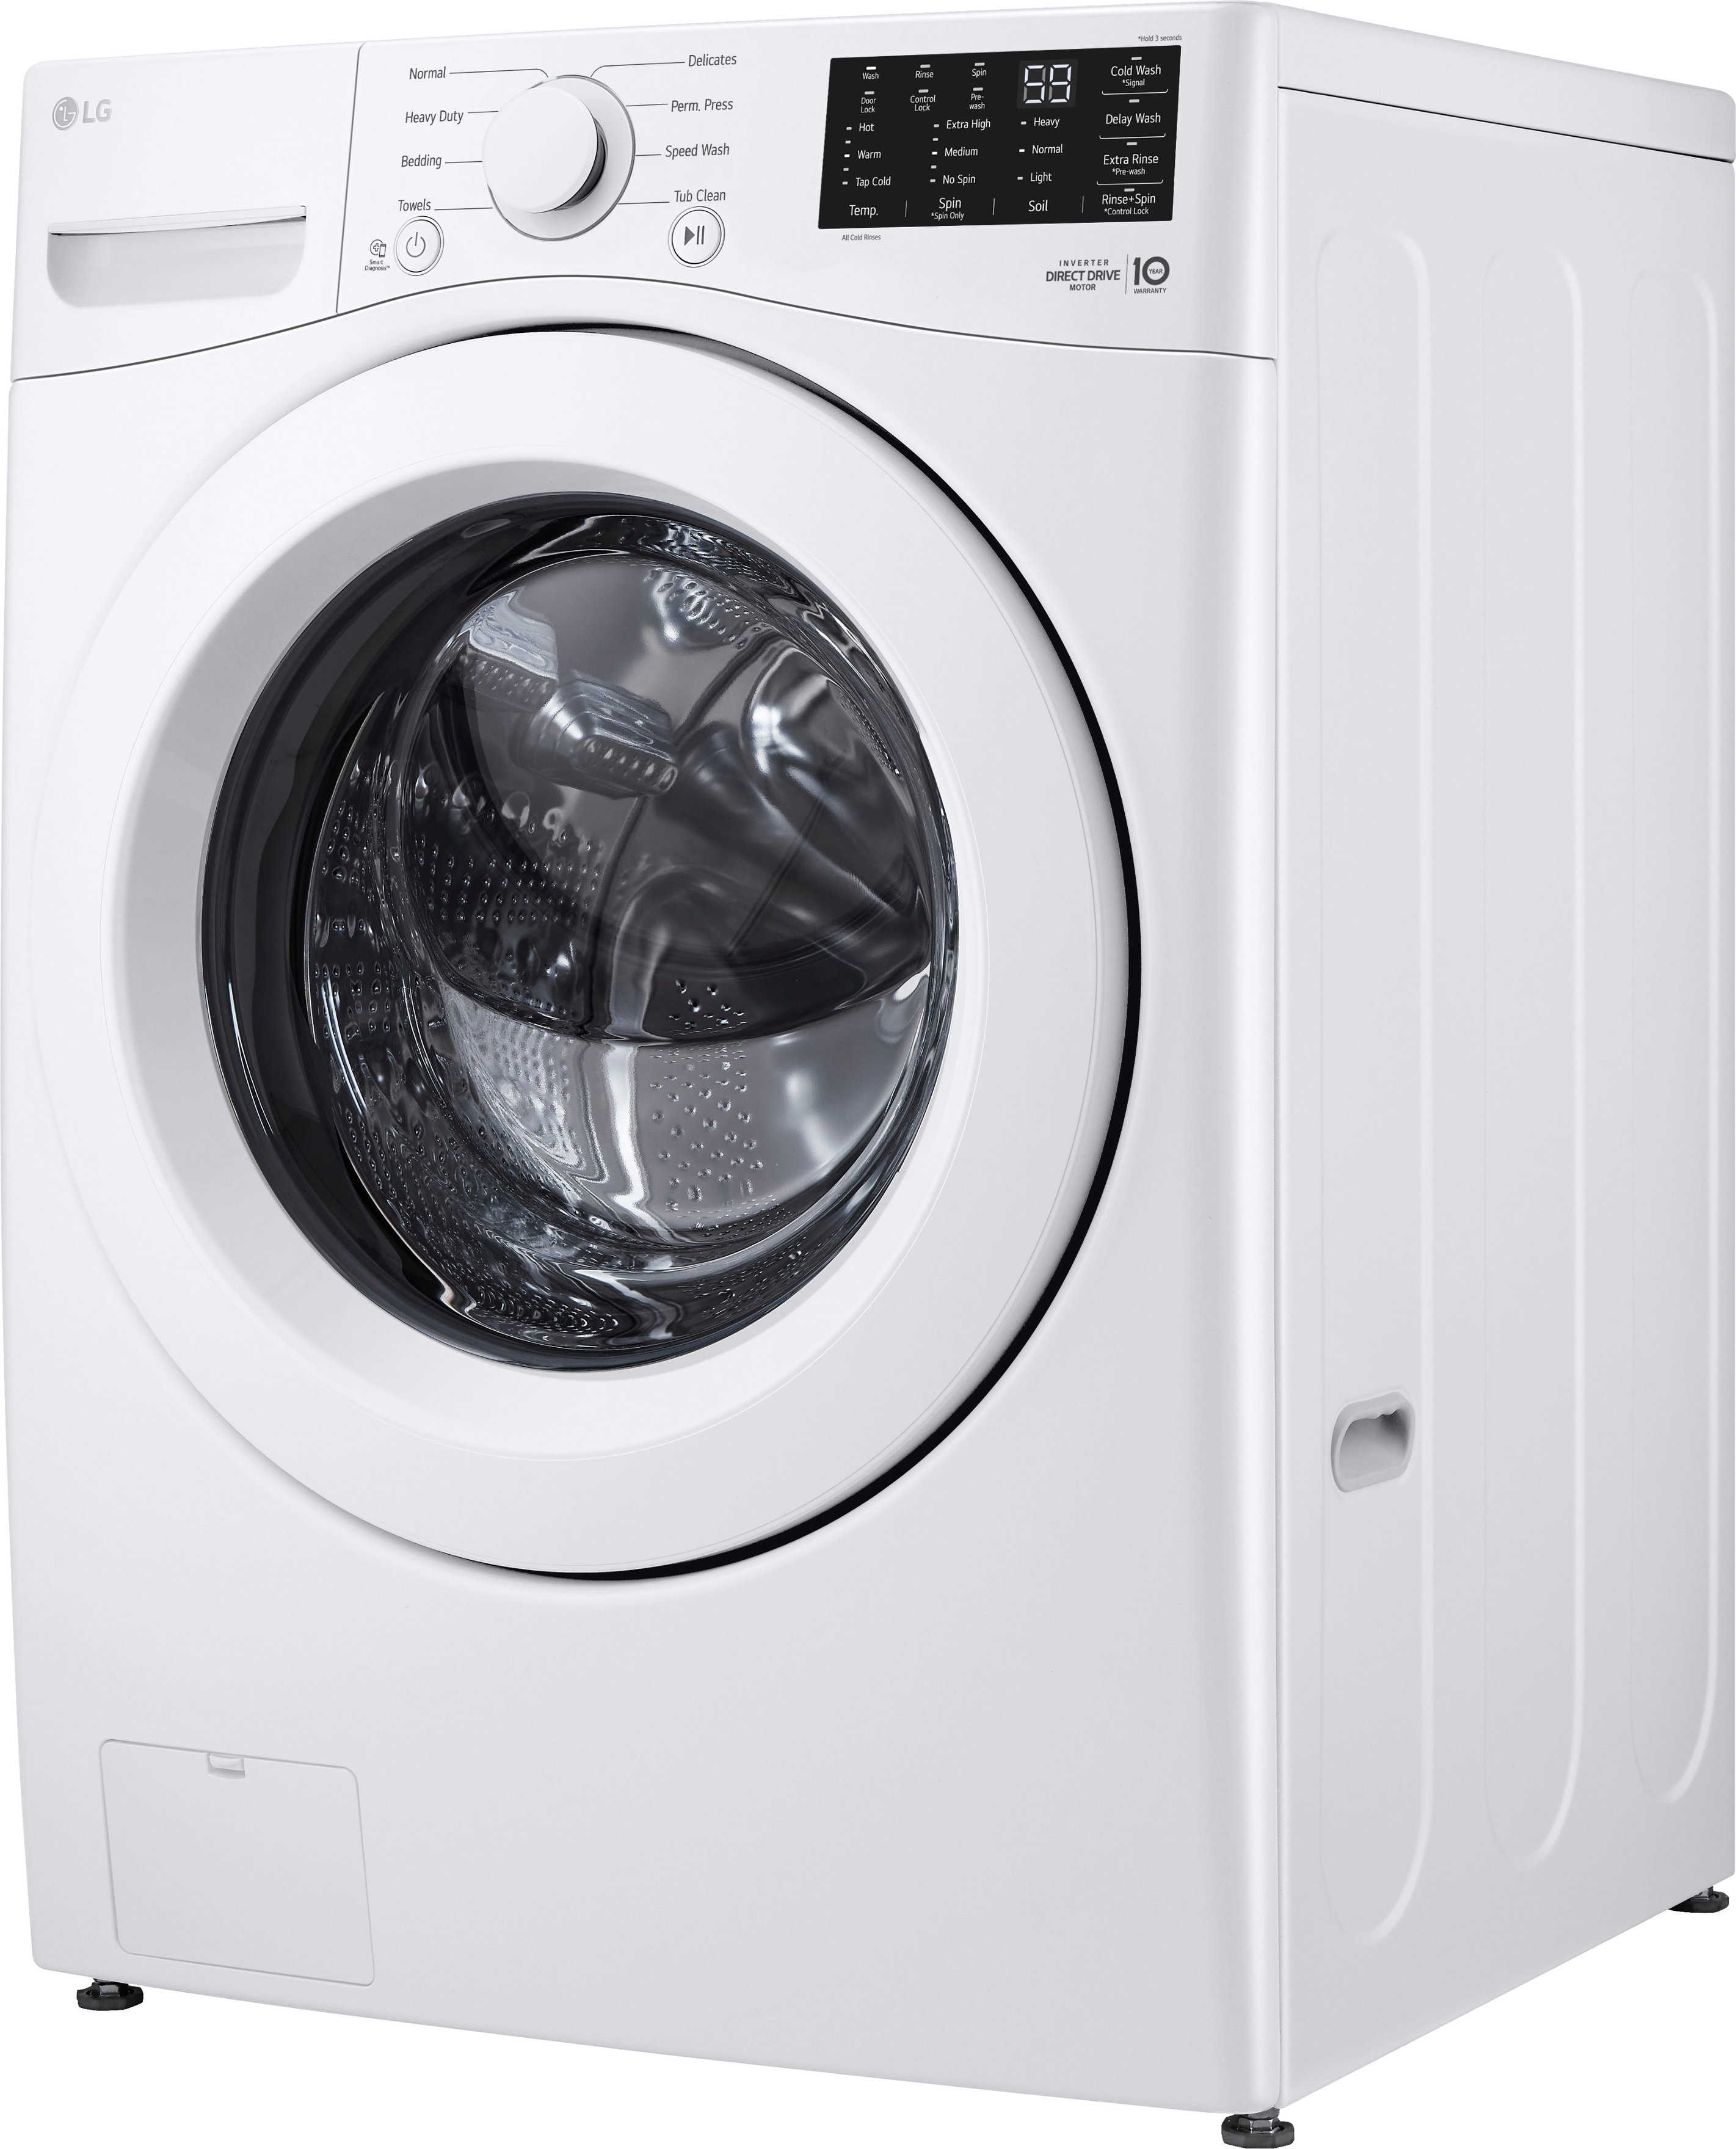 LG 5.0 Cu. Ft. High-Efficiency - Buy with White Front Best WM3470CW Washer Technology 6Motion Load